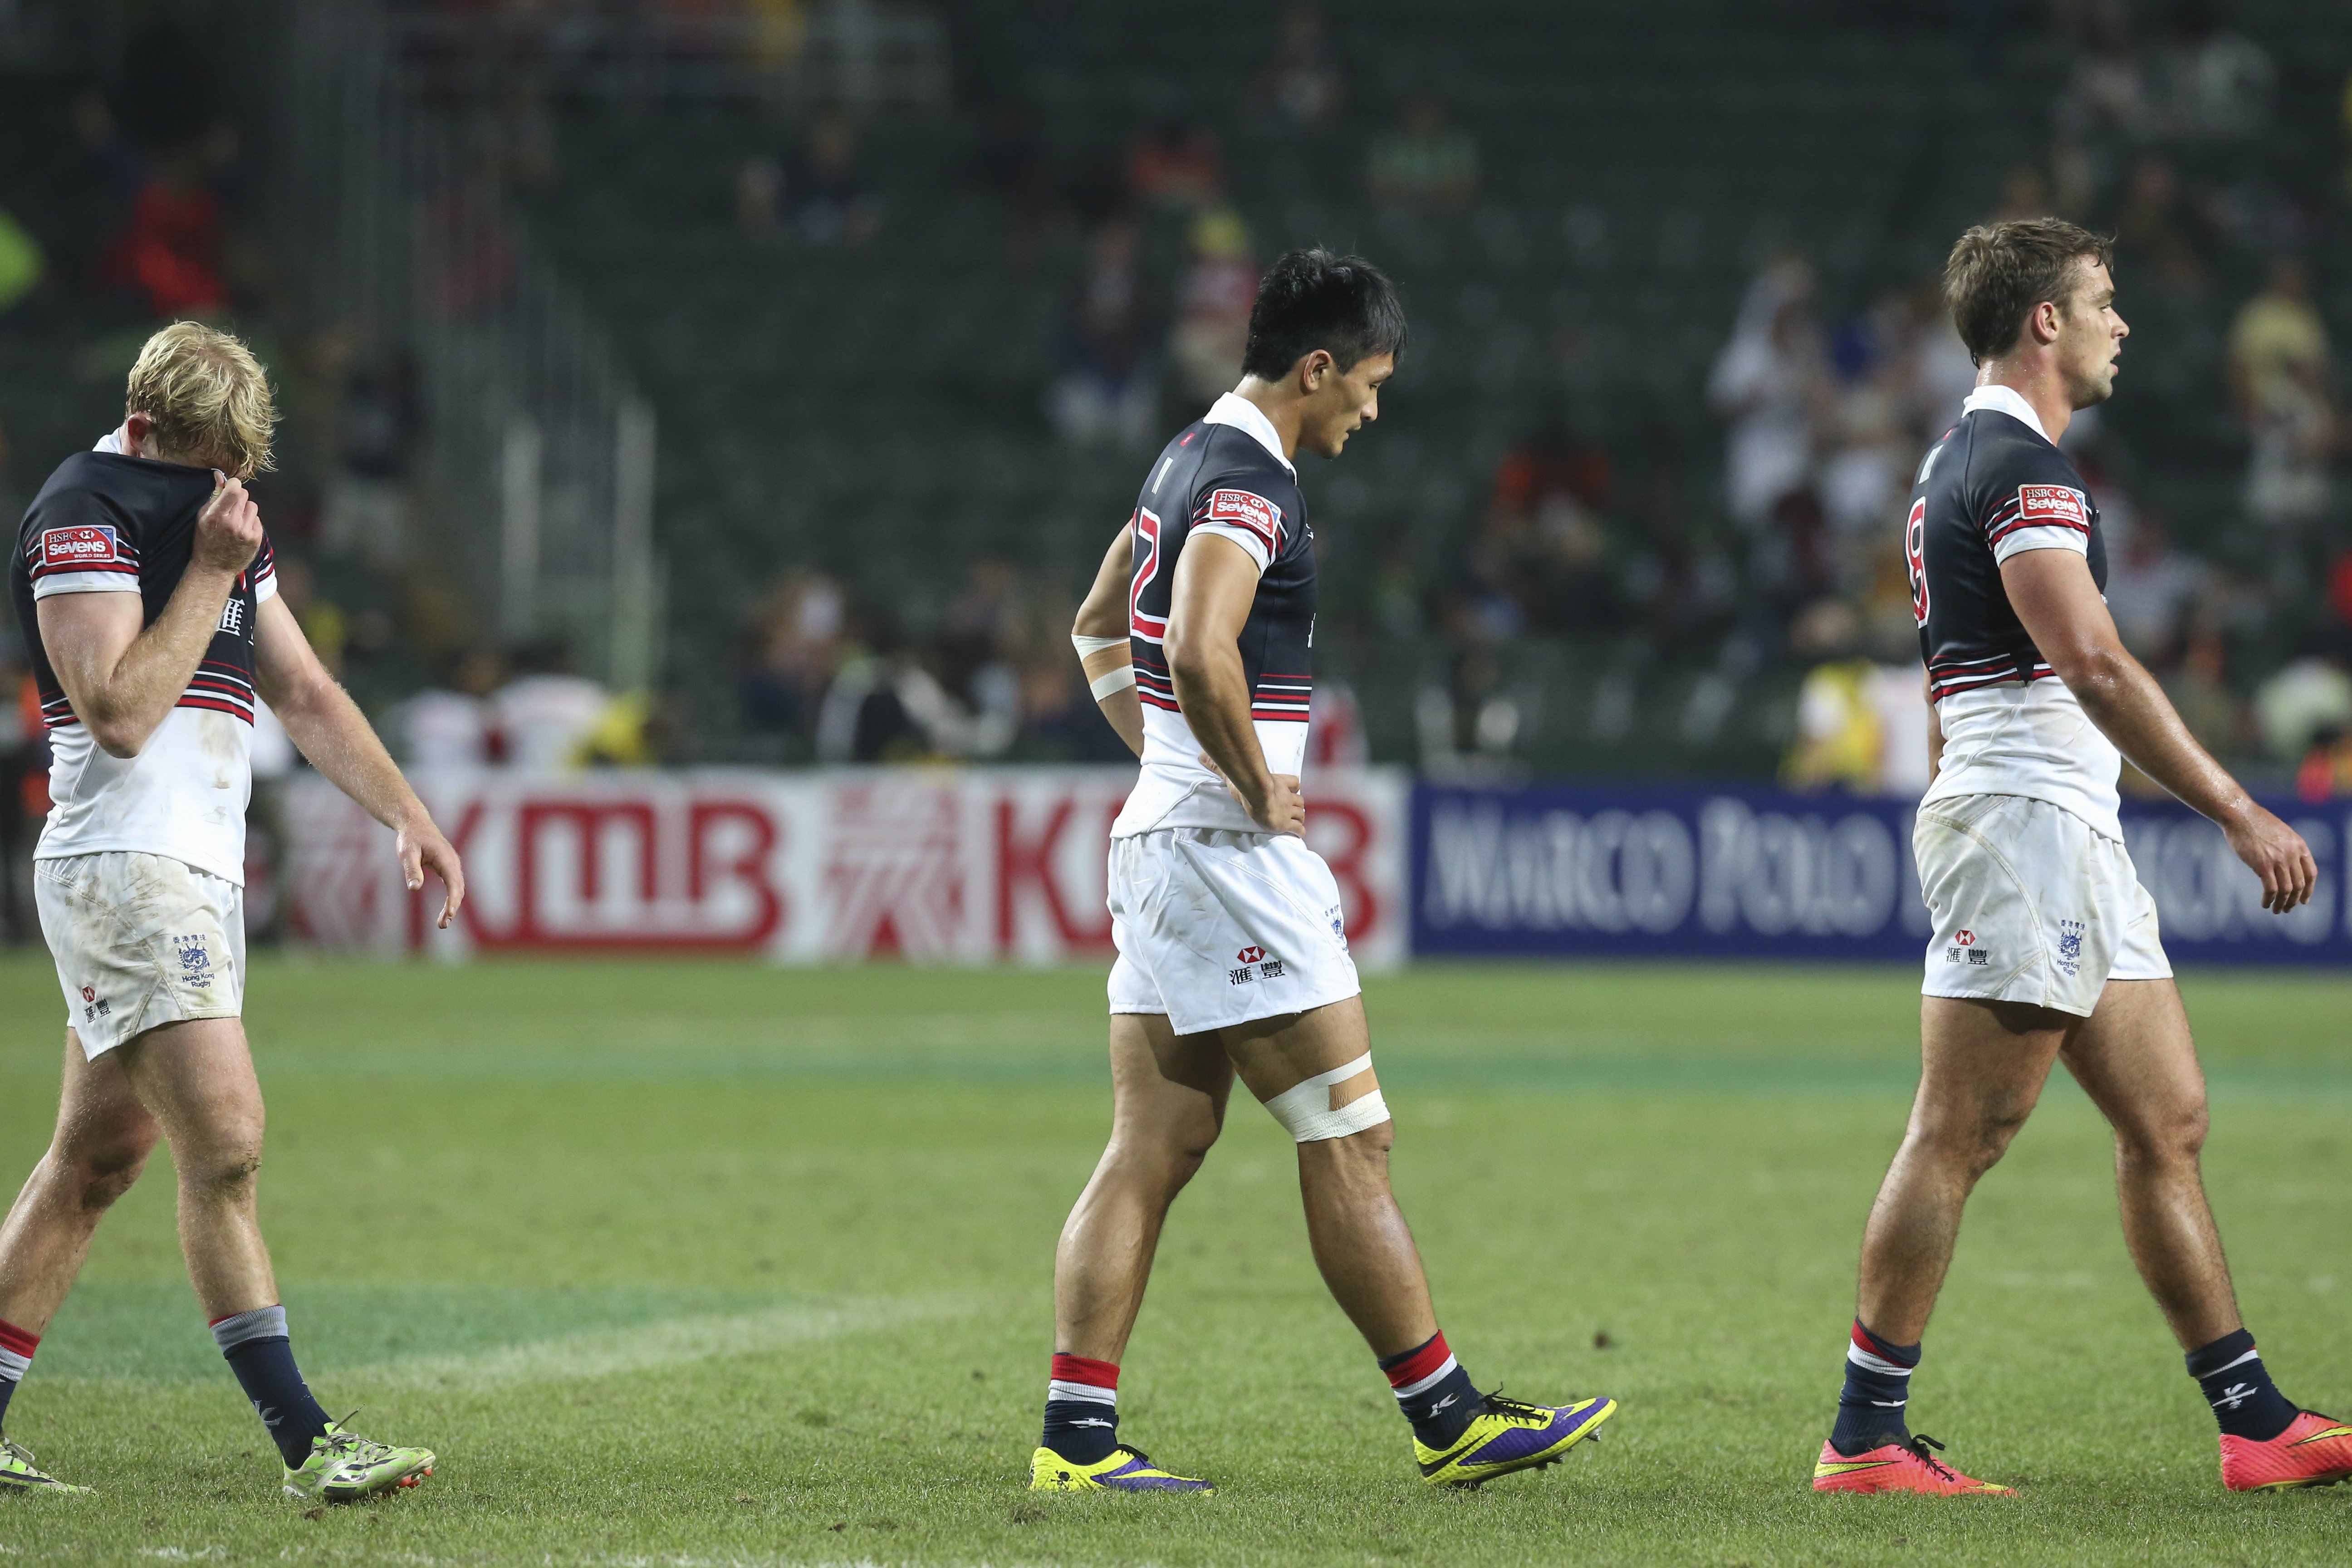 Jamie Hood, Salom Yiu Kam-shing and Chris Maize trudge off after Hong Kong crash out of contention in the battle to win core status on the Sevens World Series. Photo: KY Cheng/SCMP